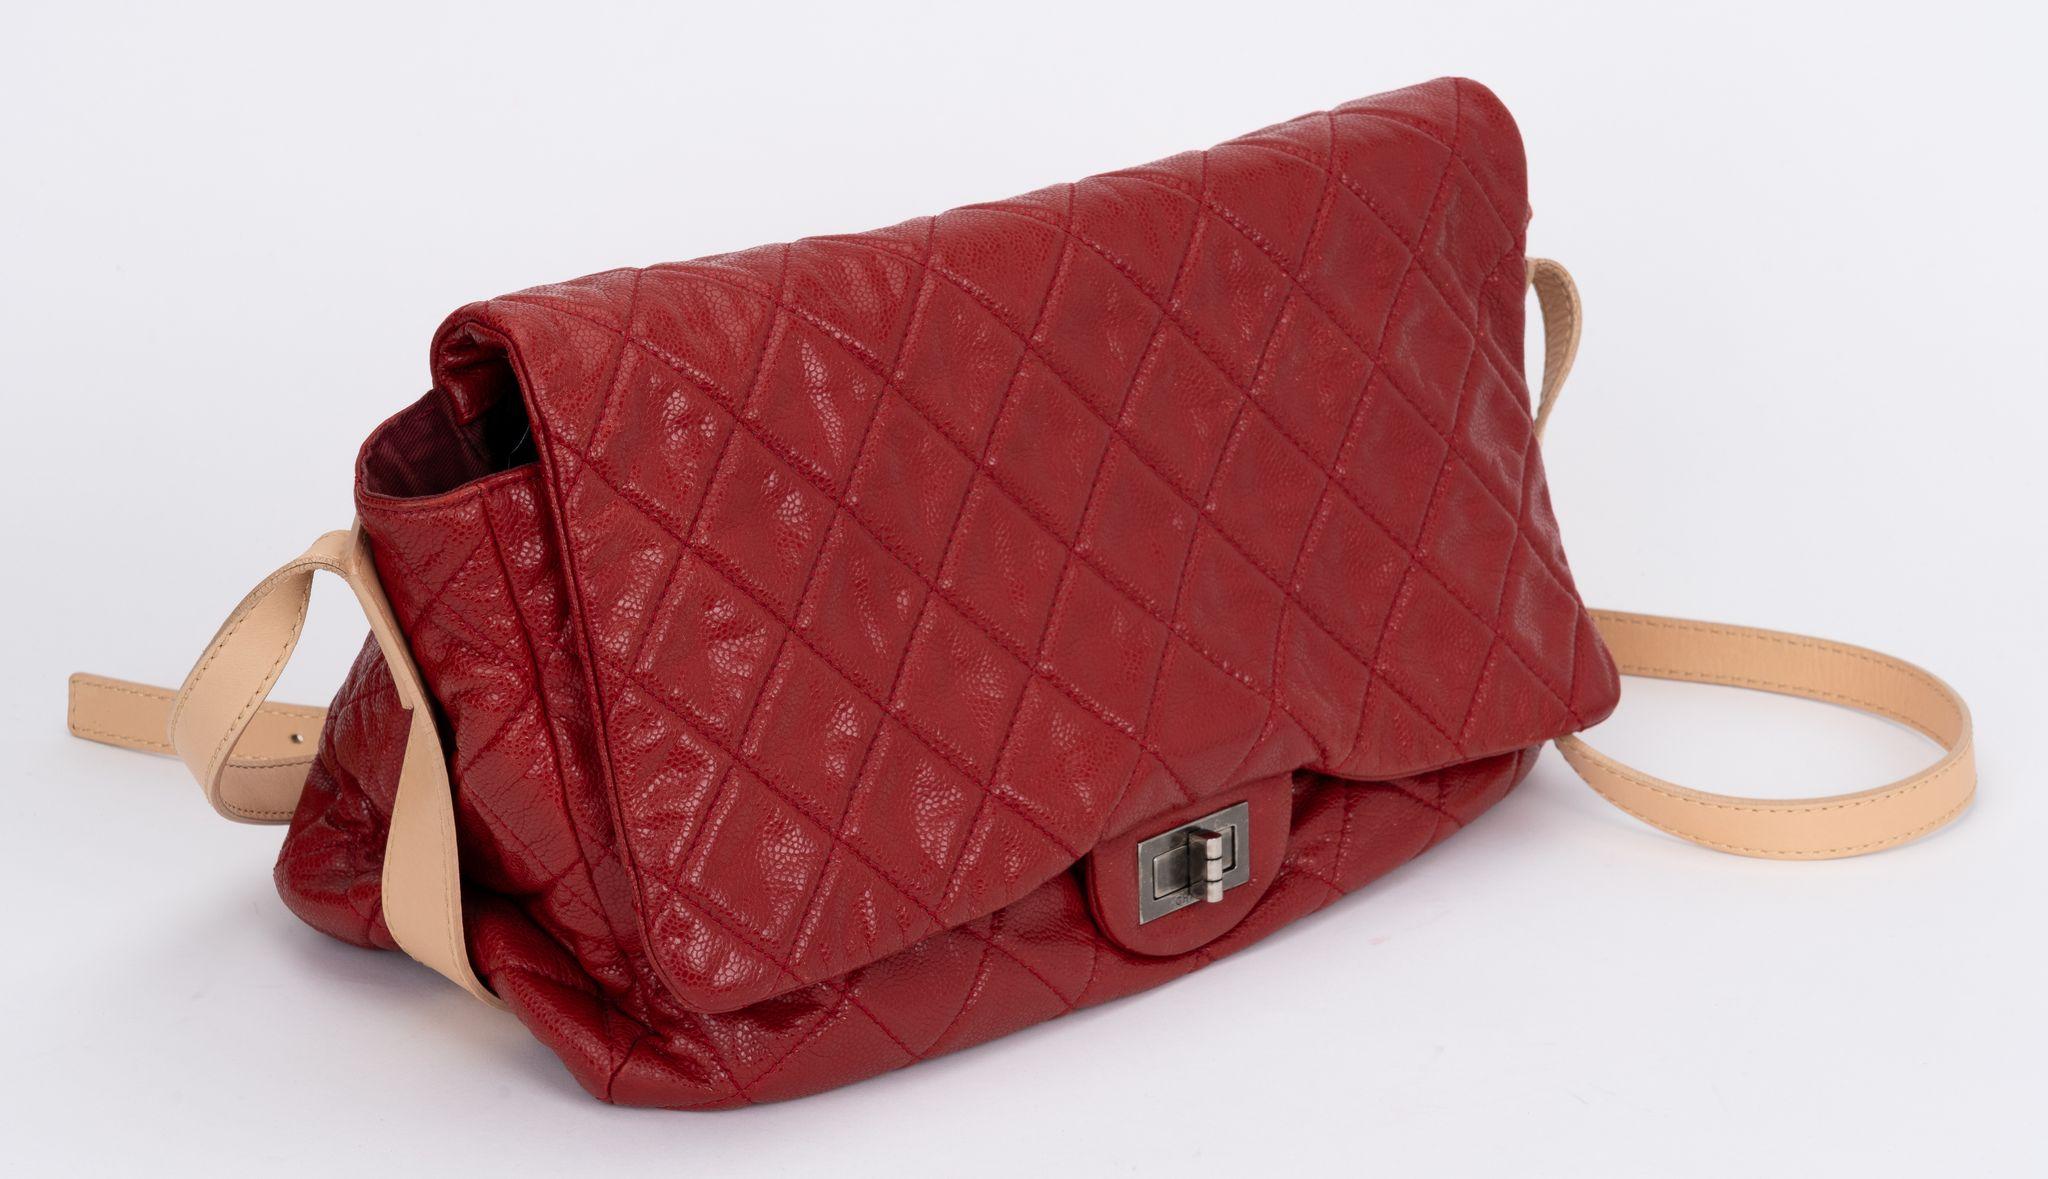 Chanel red caviar reissue jumbo cross body bag. Natural cowhide strap and details. Shoulder drop adjustable 22